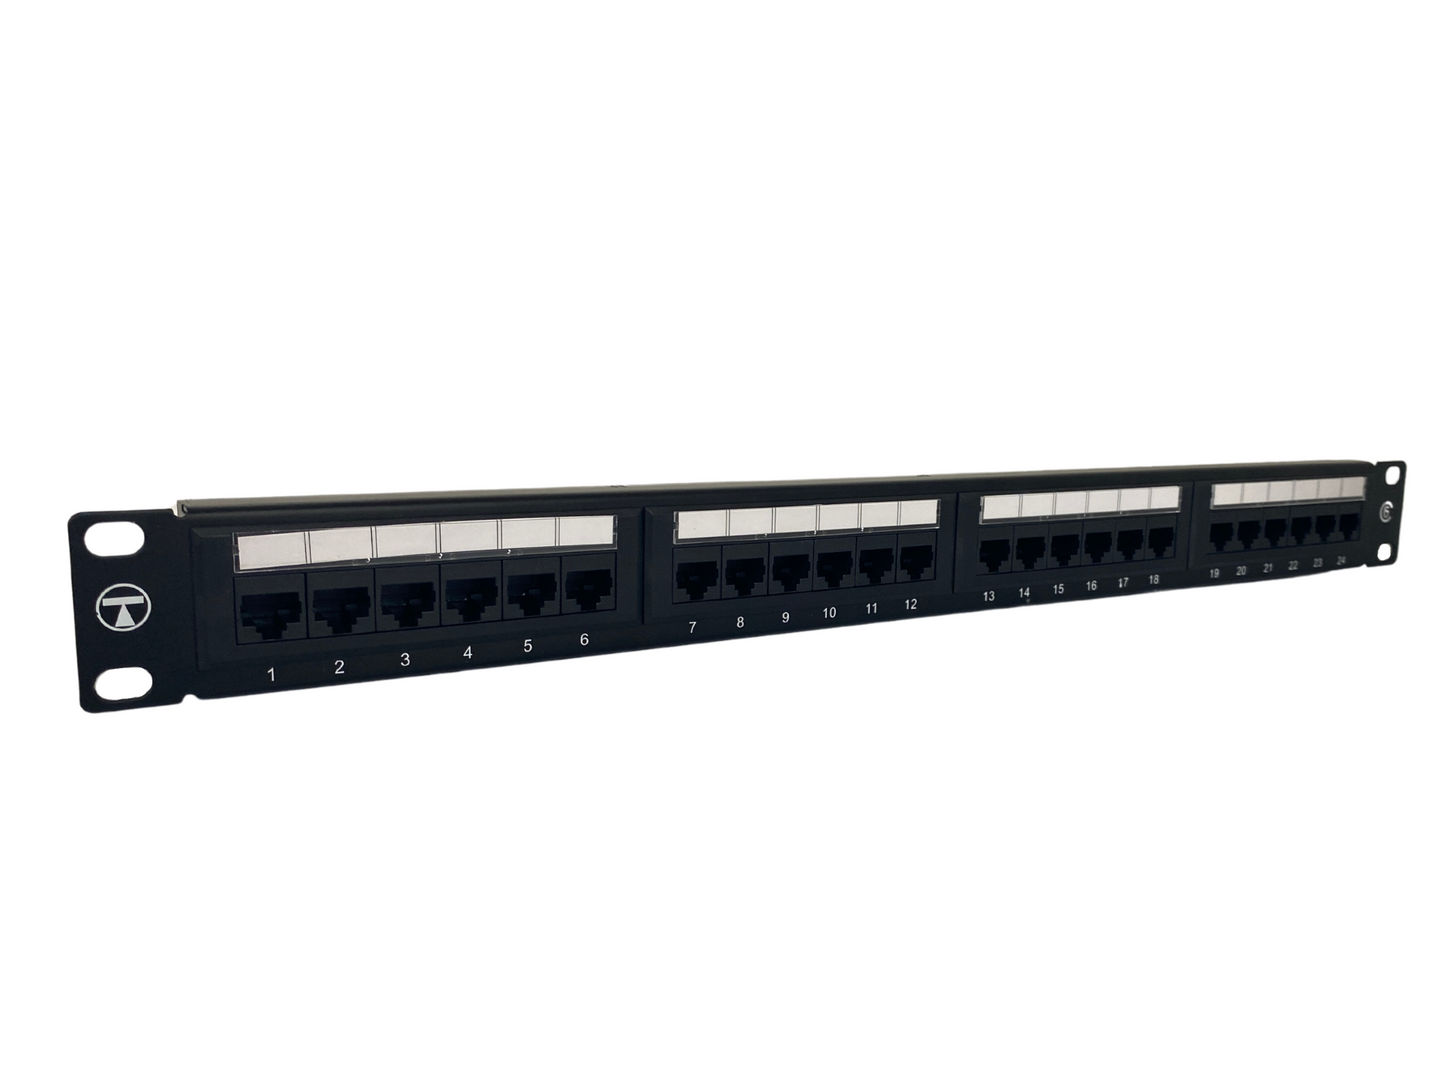 Cat 6 24 Port 1U Patch Panel with Cable Management Cable Ties and Cage Nut Set